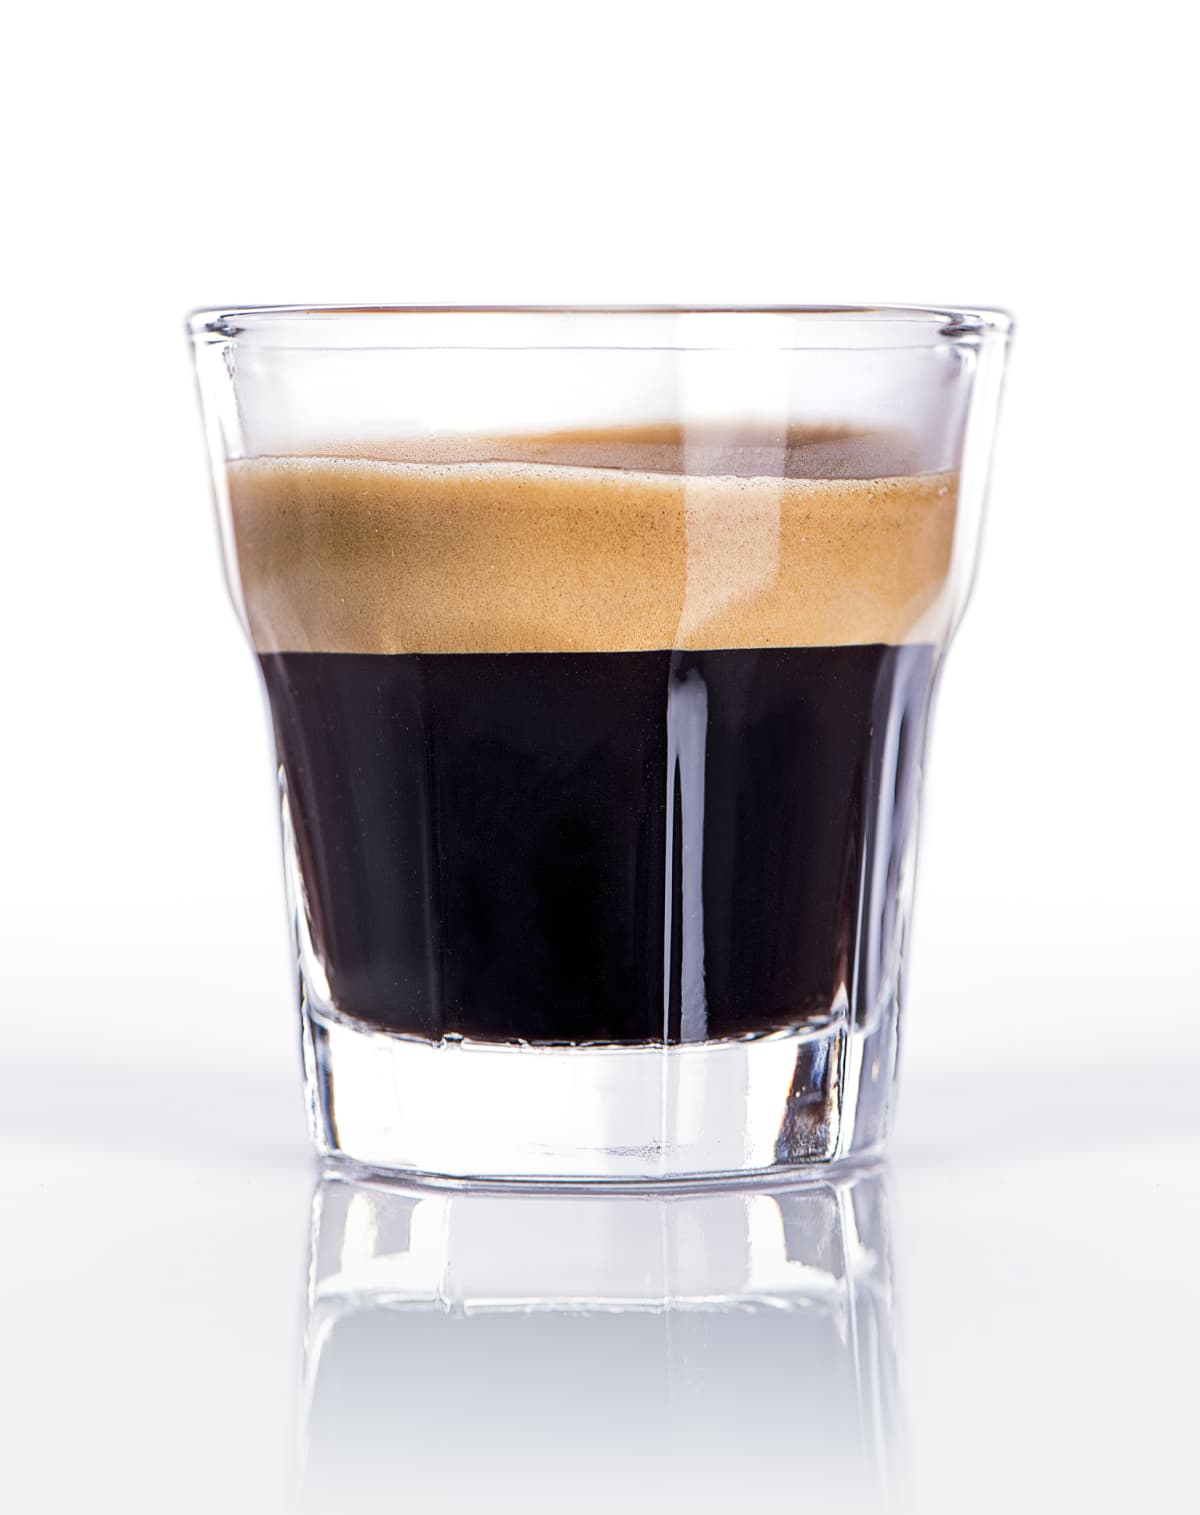 Close up of a glass of espresso on a white background